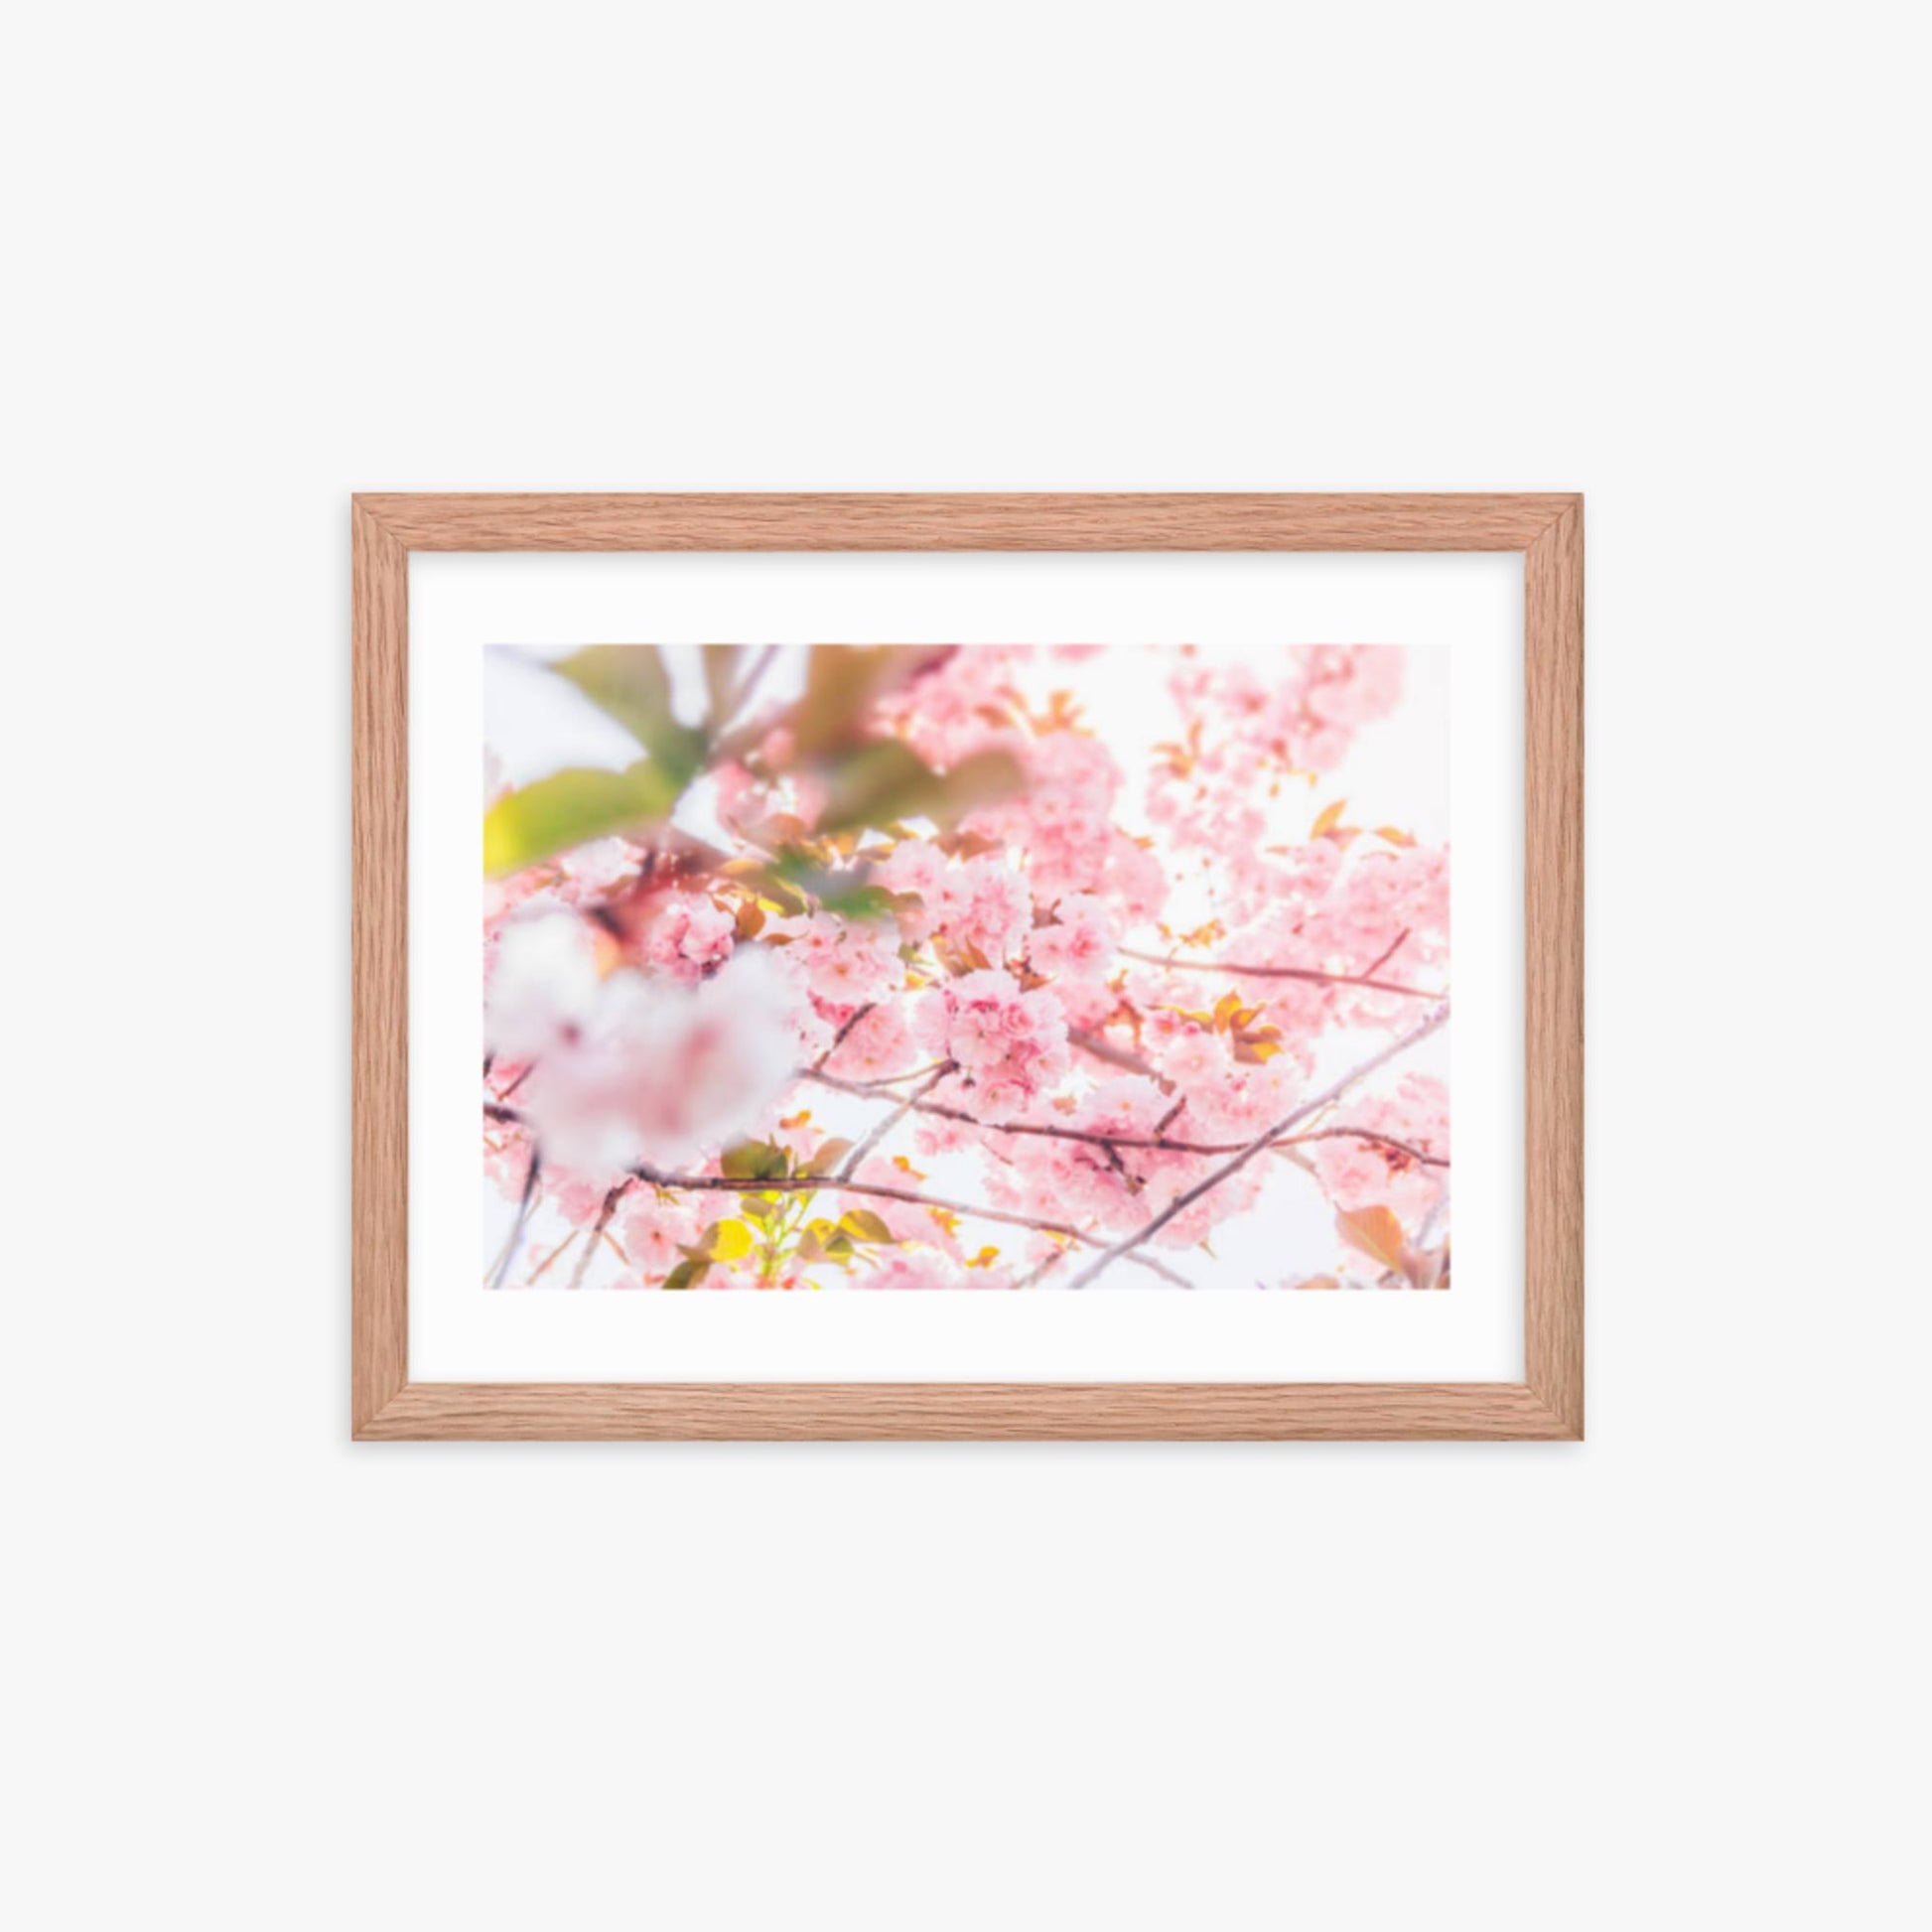 Cherry blossom flowers and sunshine 12x16 in Poster With Oak Frame